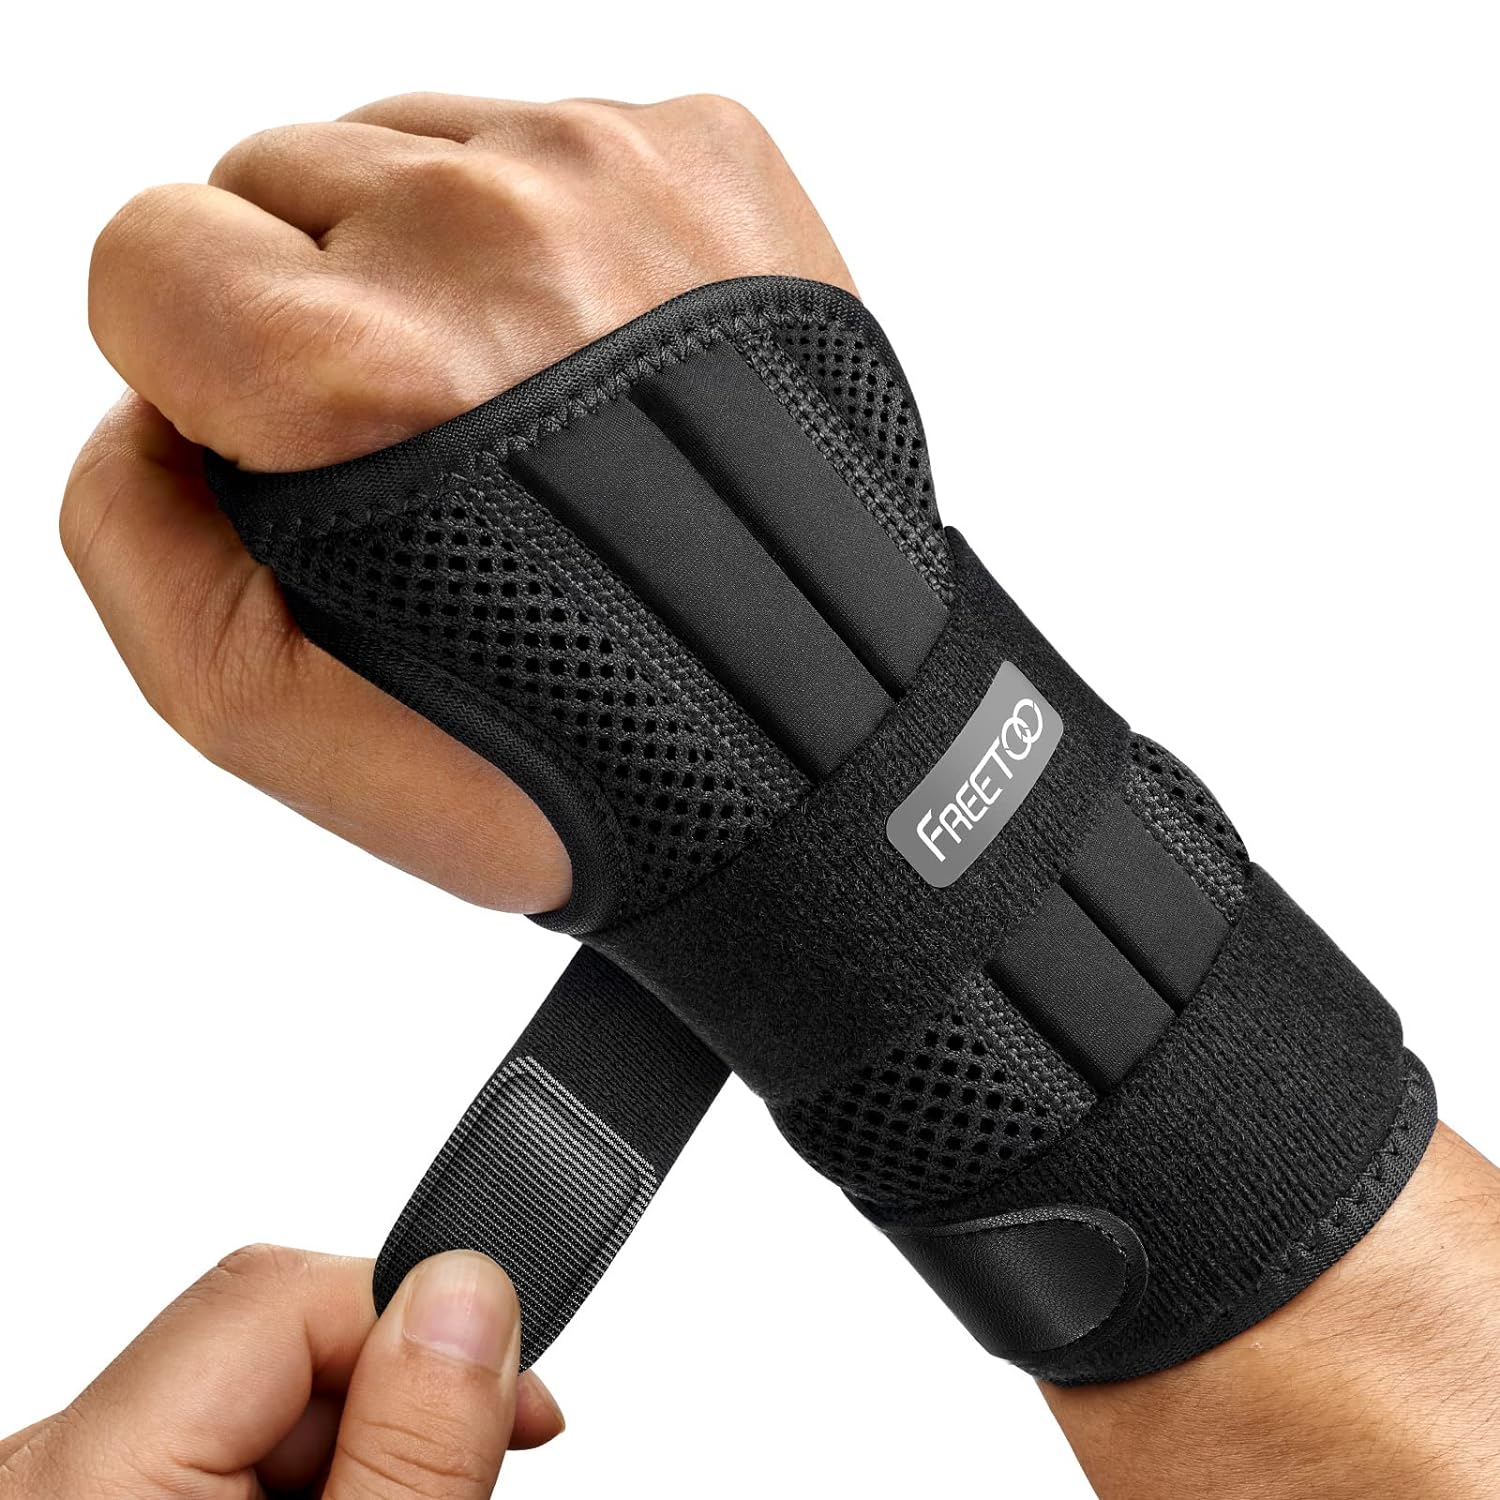 Carpal Tunnel Relief Brace Review